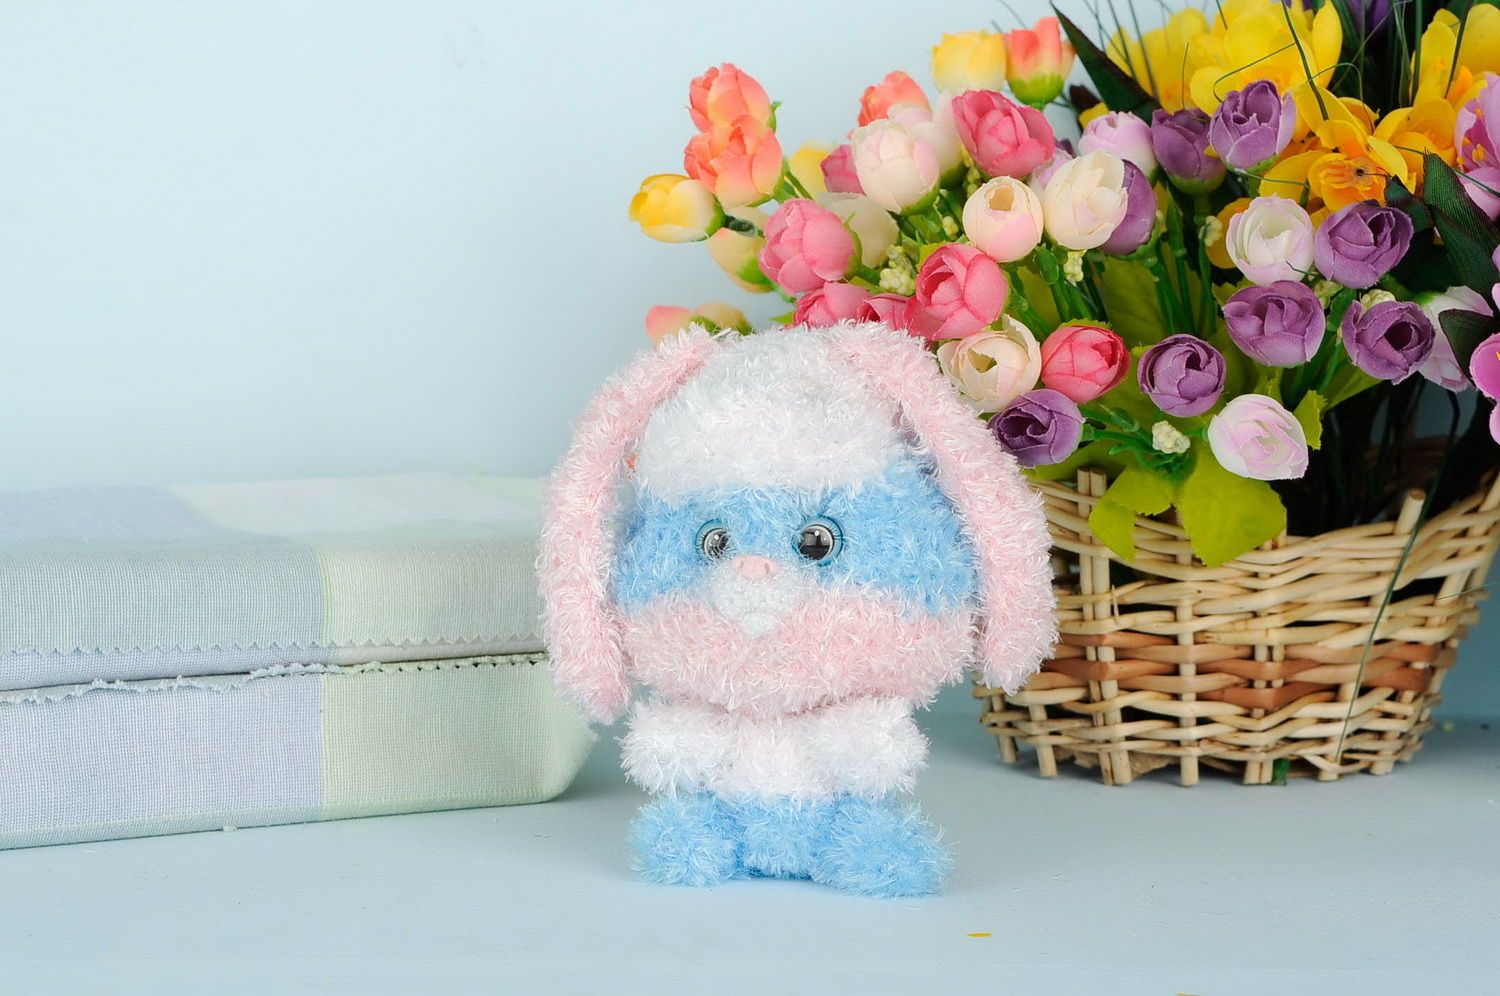 Crocheted toy Hare photo 1